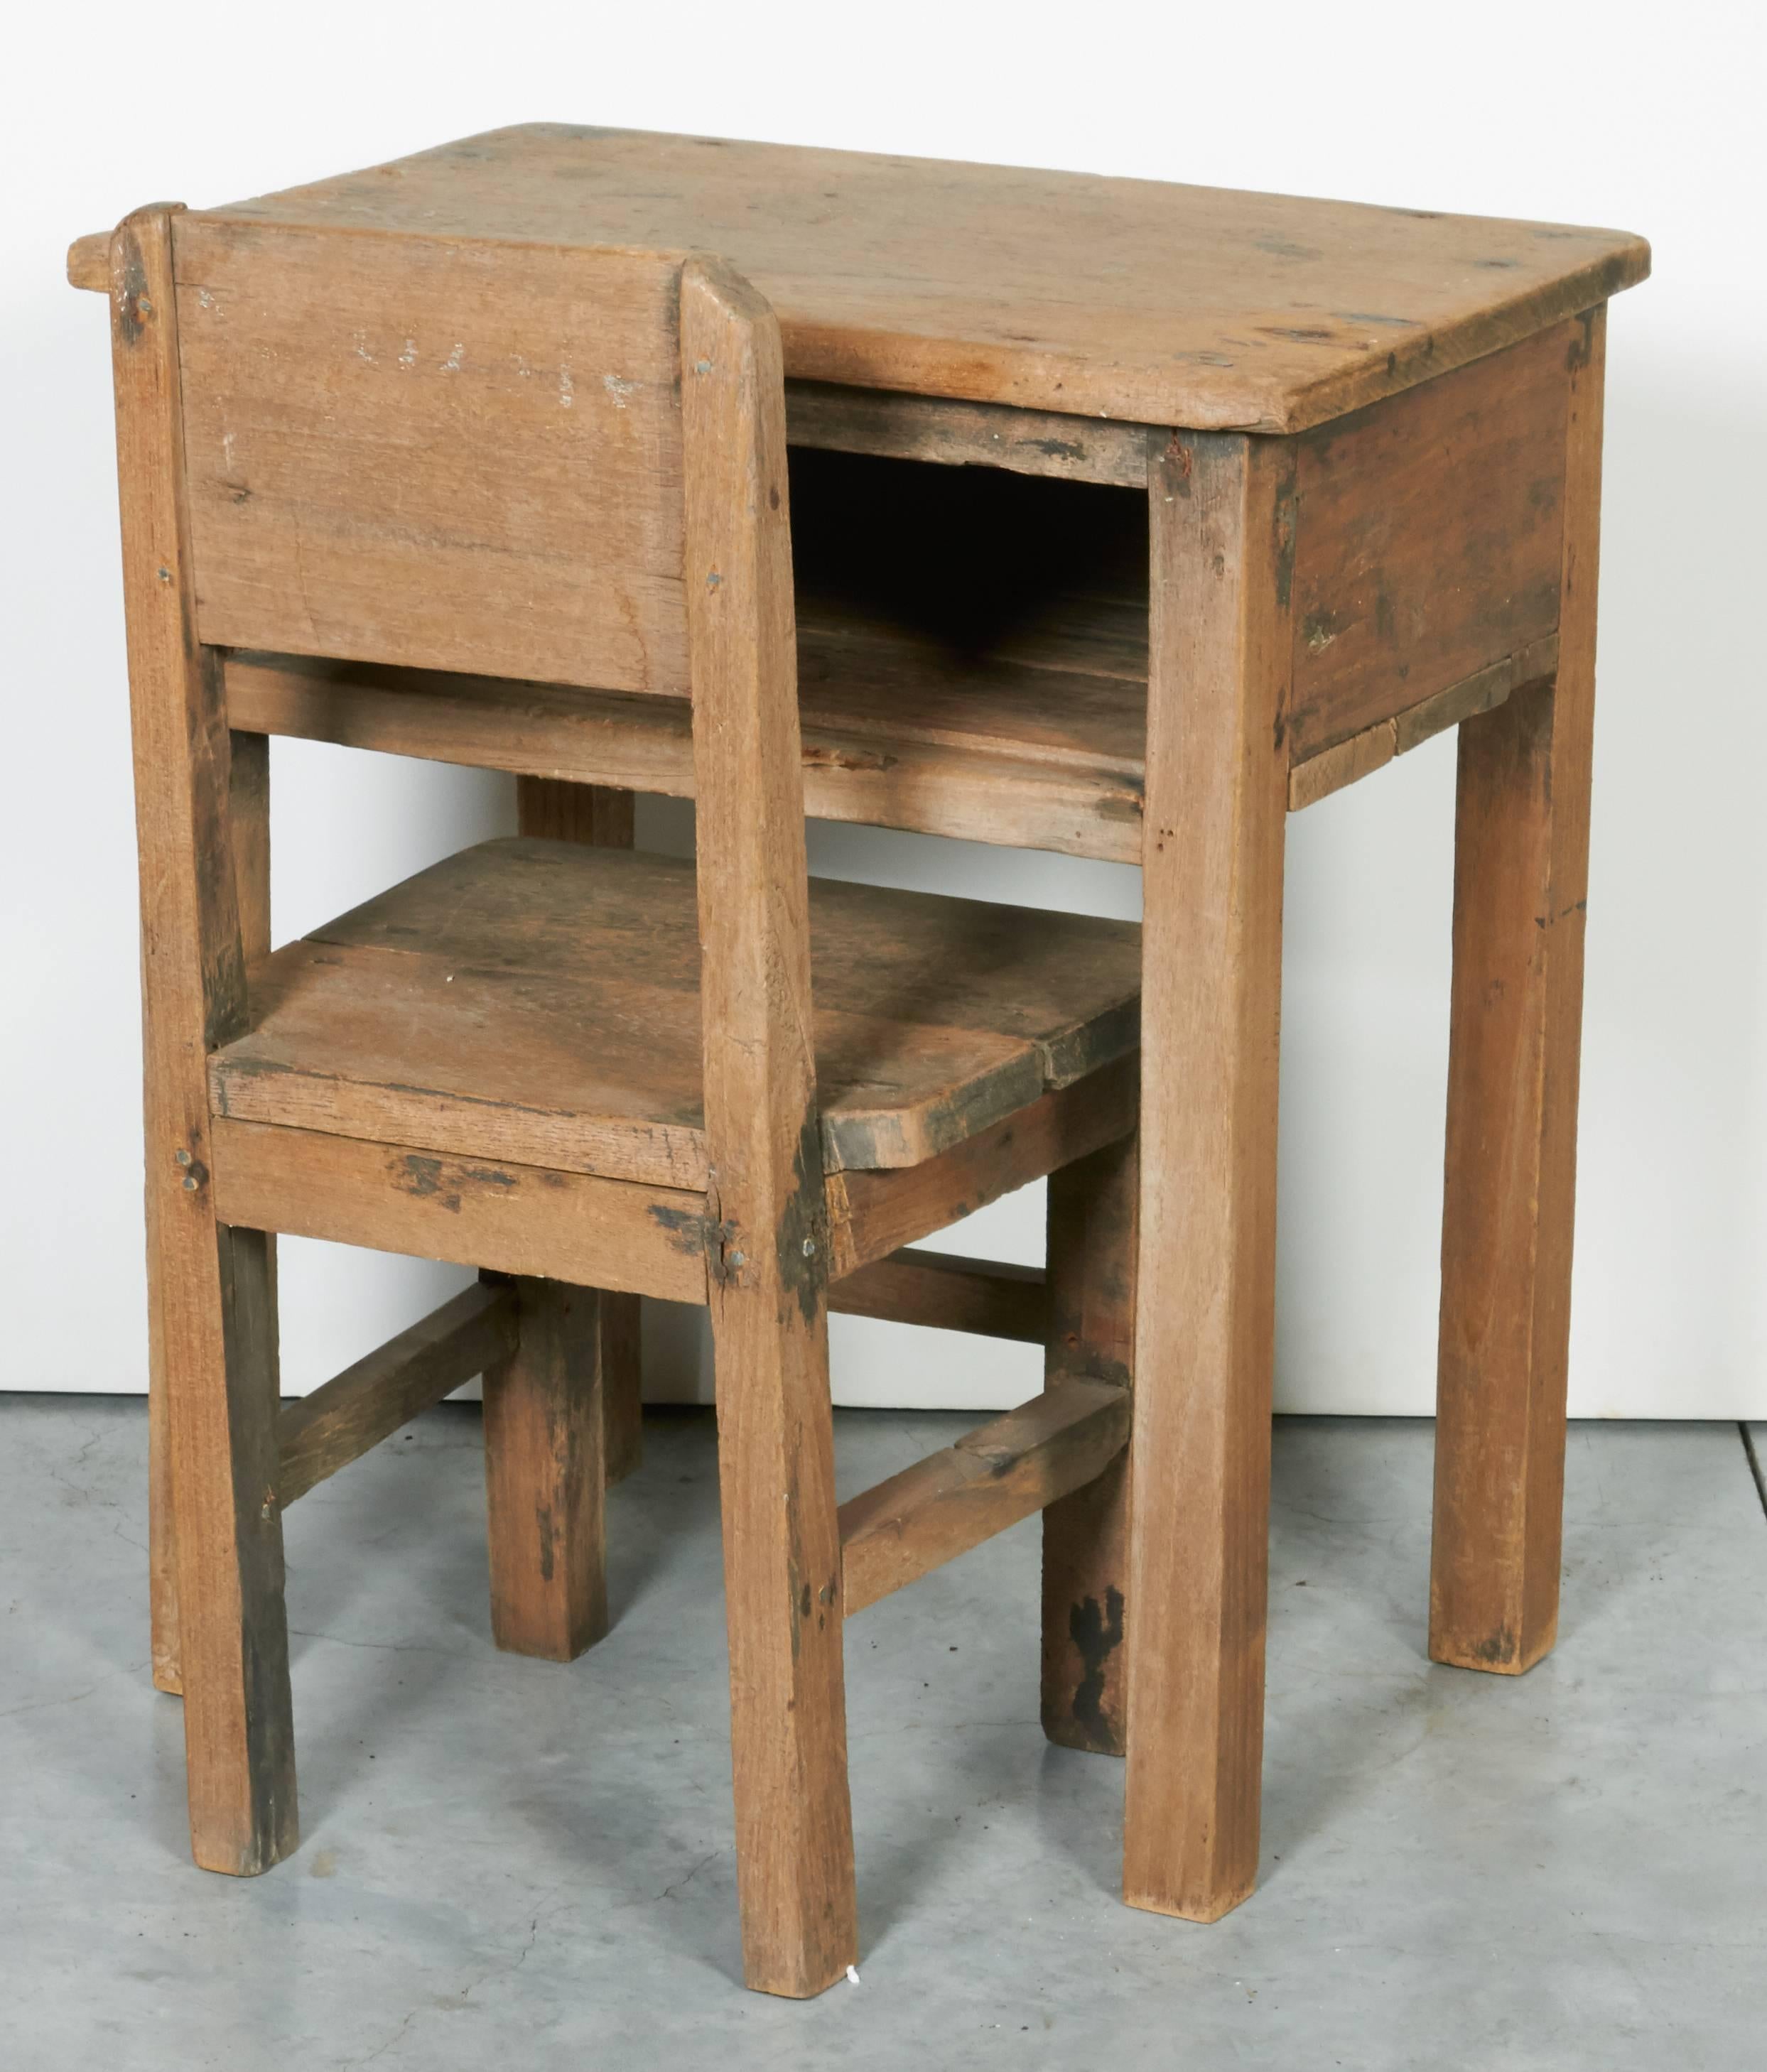 A charming vintage teak child's school desk and chair in a simple, traditional style easily used as a side table or a nightstand, as well it's original use as a child's desk and chair. The old Burmese writing on the back of the desk adds interest